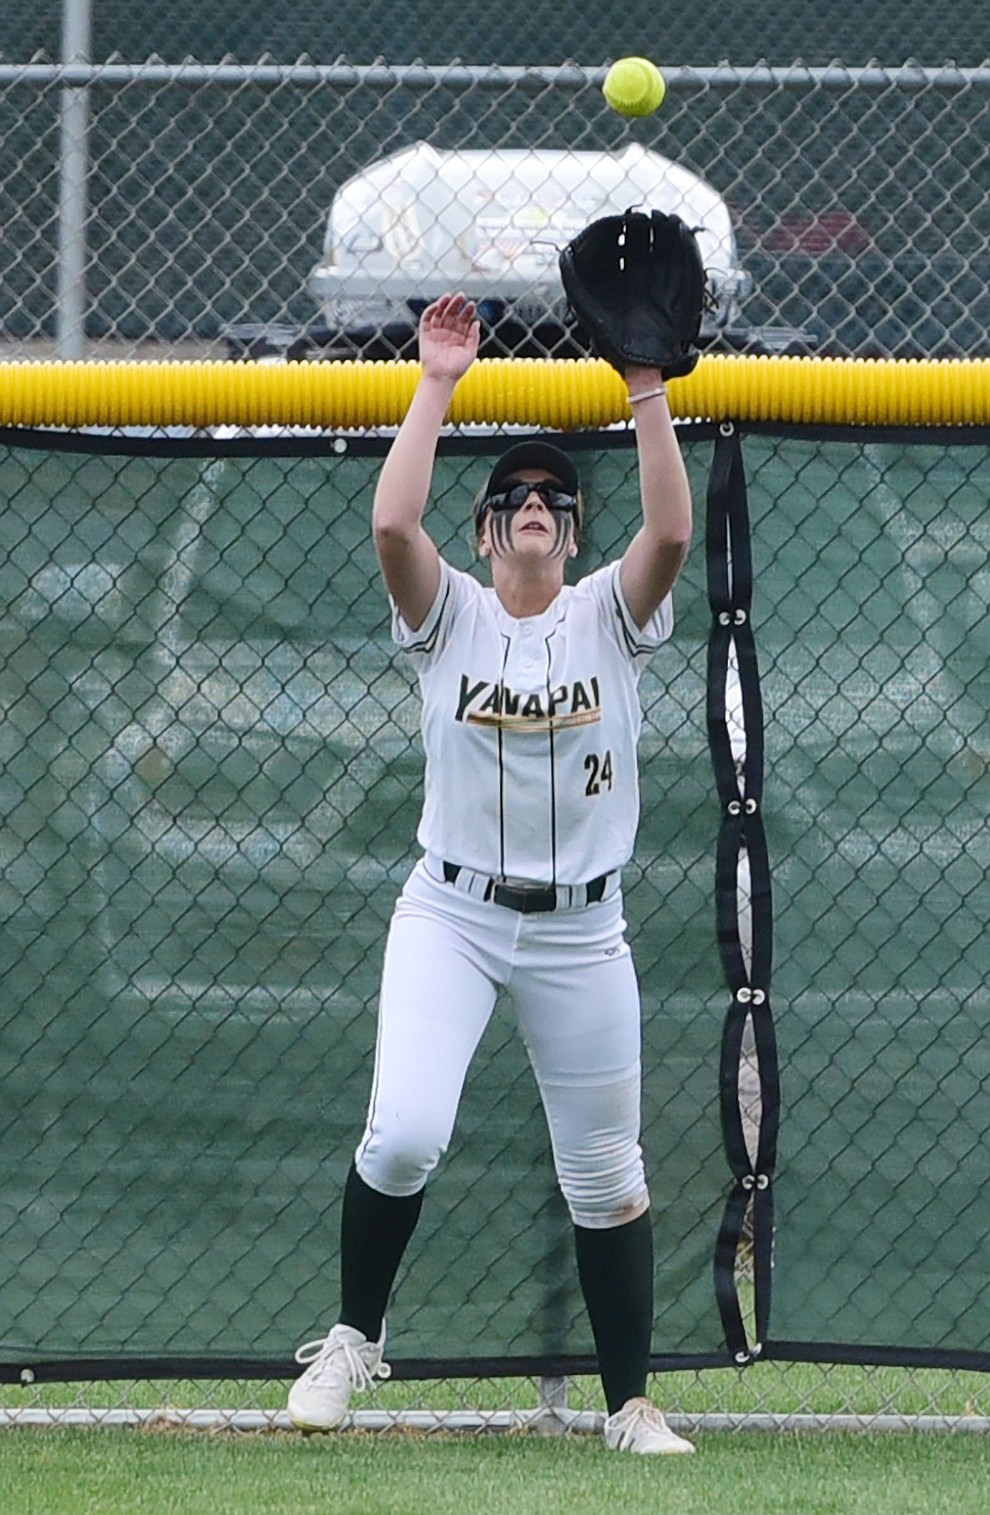 Yavapai's Mikayla Newham makes the catch against the fence as the Lady Roughriders play Central Arizona in softball Saturday, April 8 in Prescott.  (Les Stukenberg/Courier)